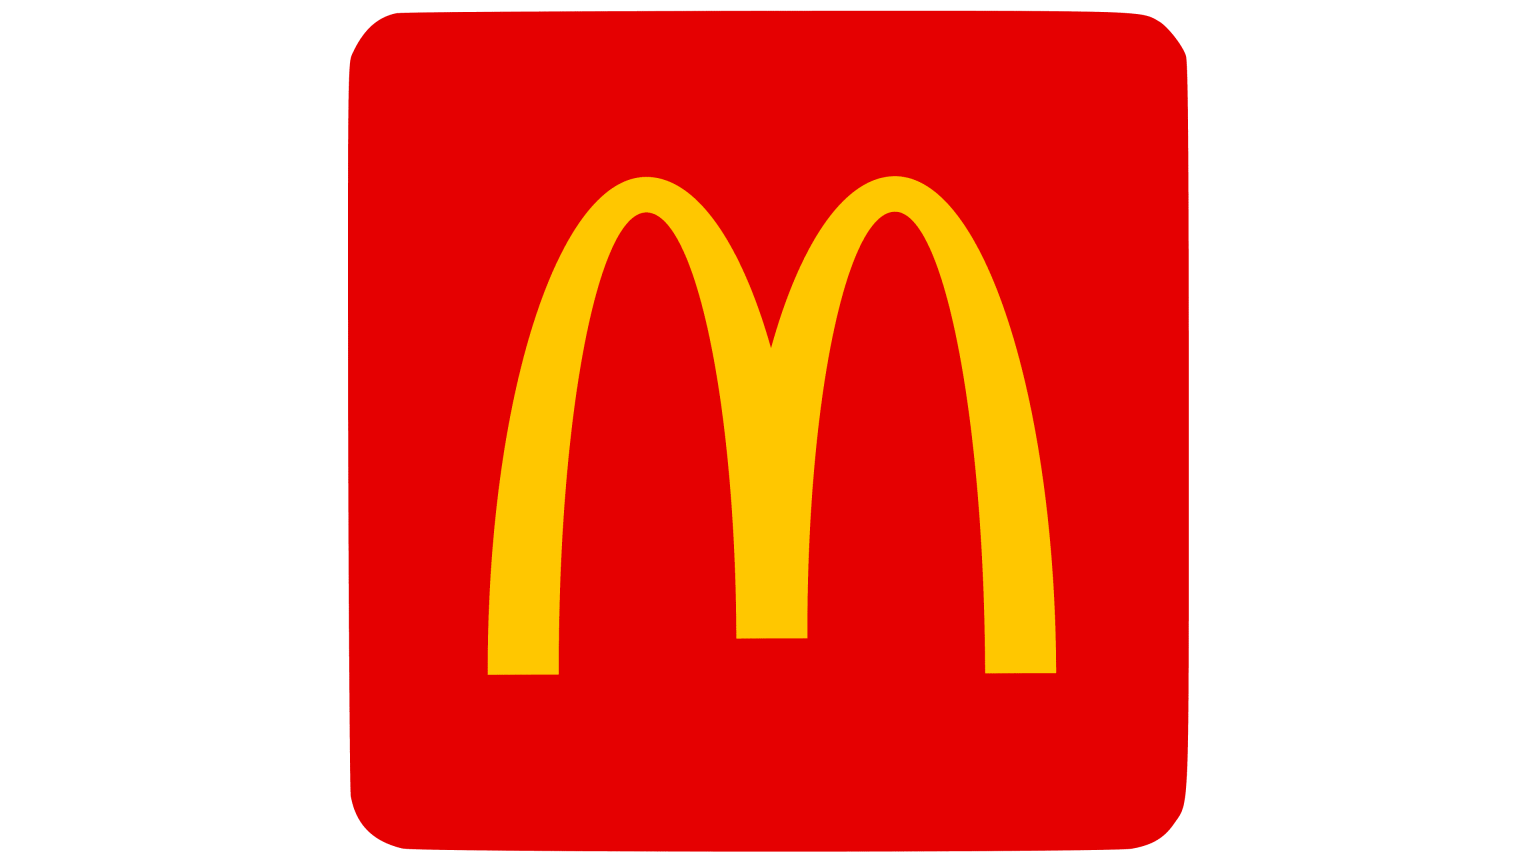 Mcdonalds Logo And Symbol Meaning History Png Brand